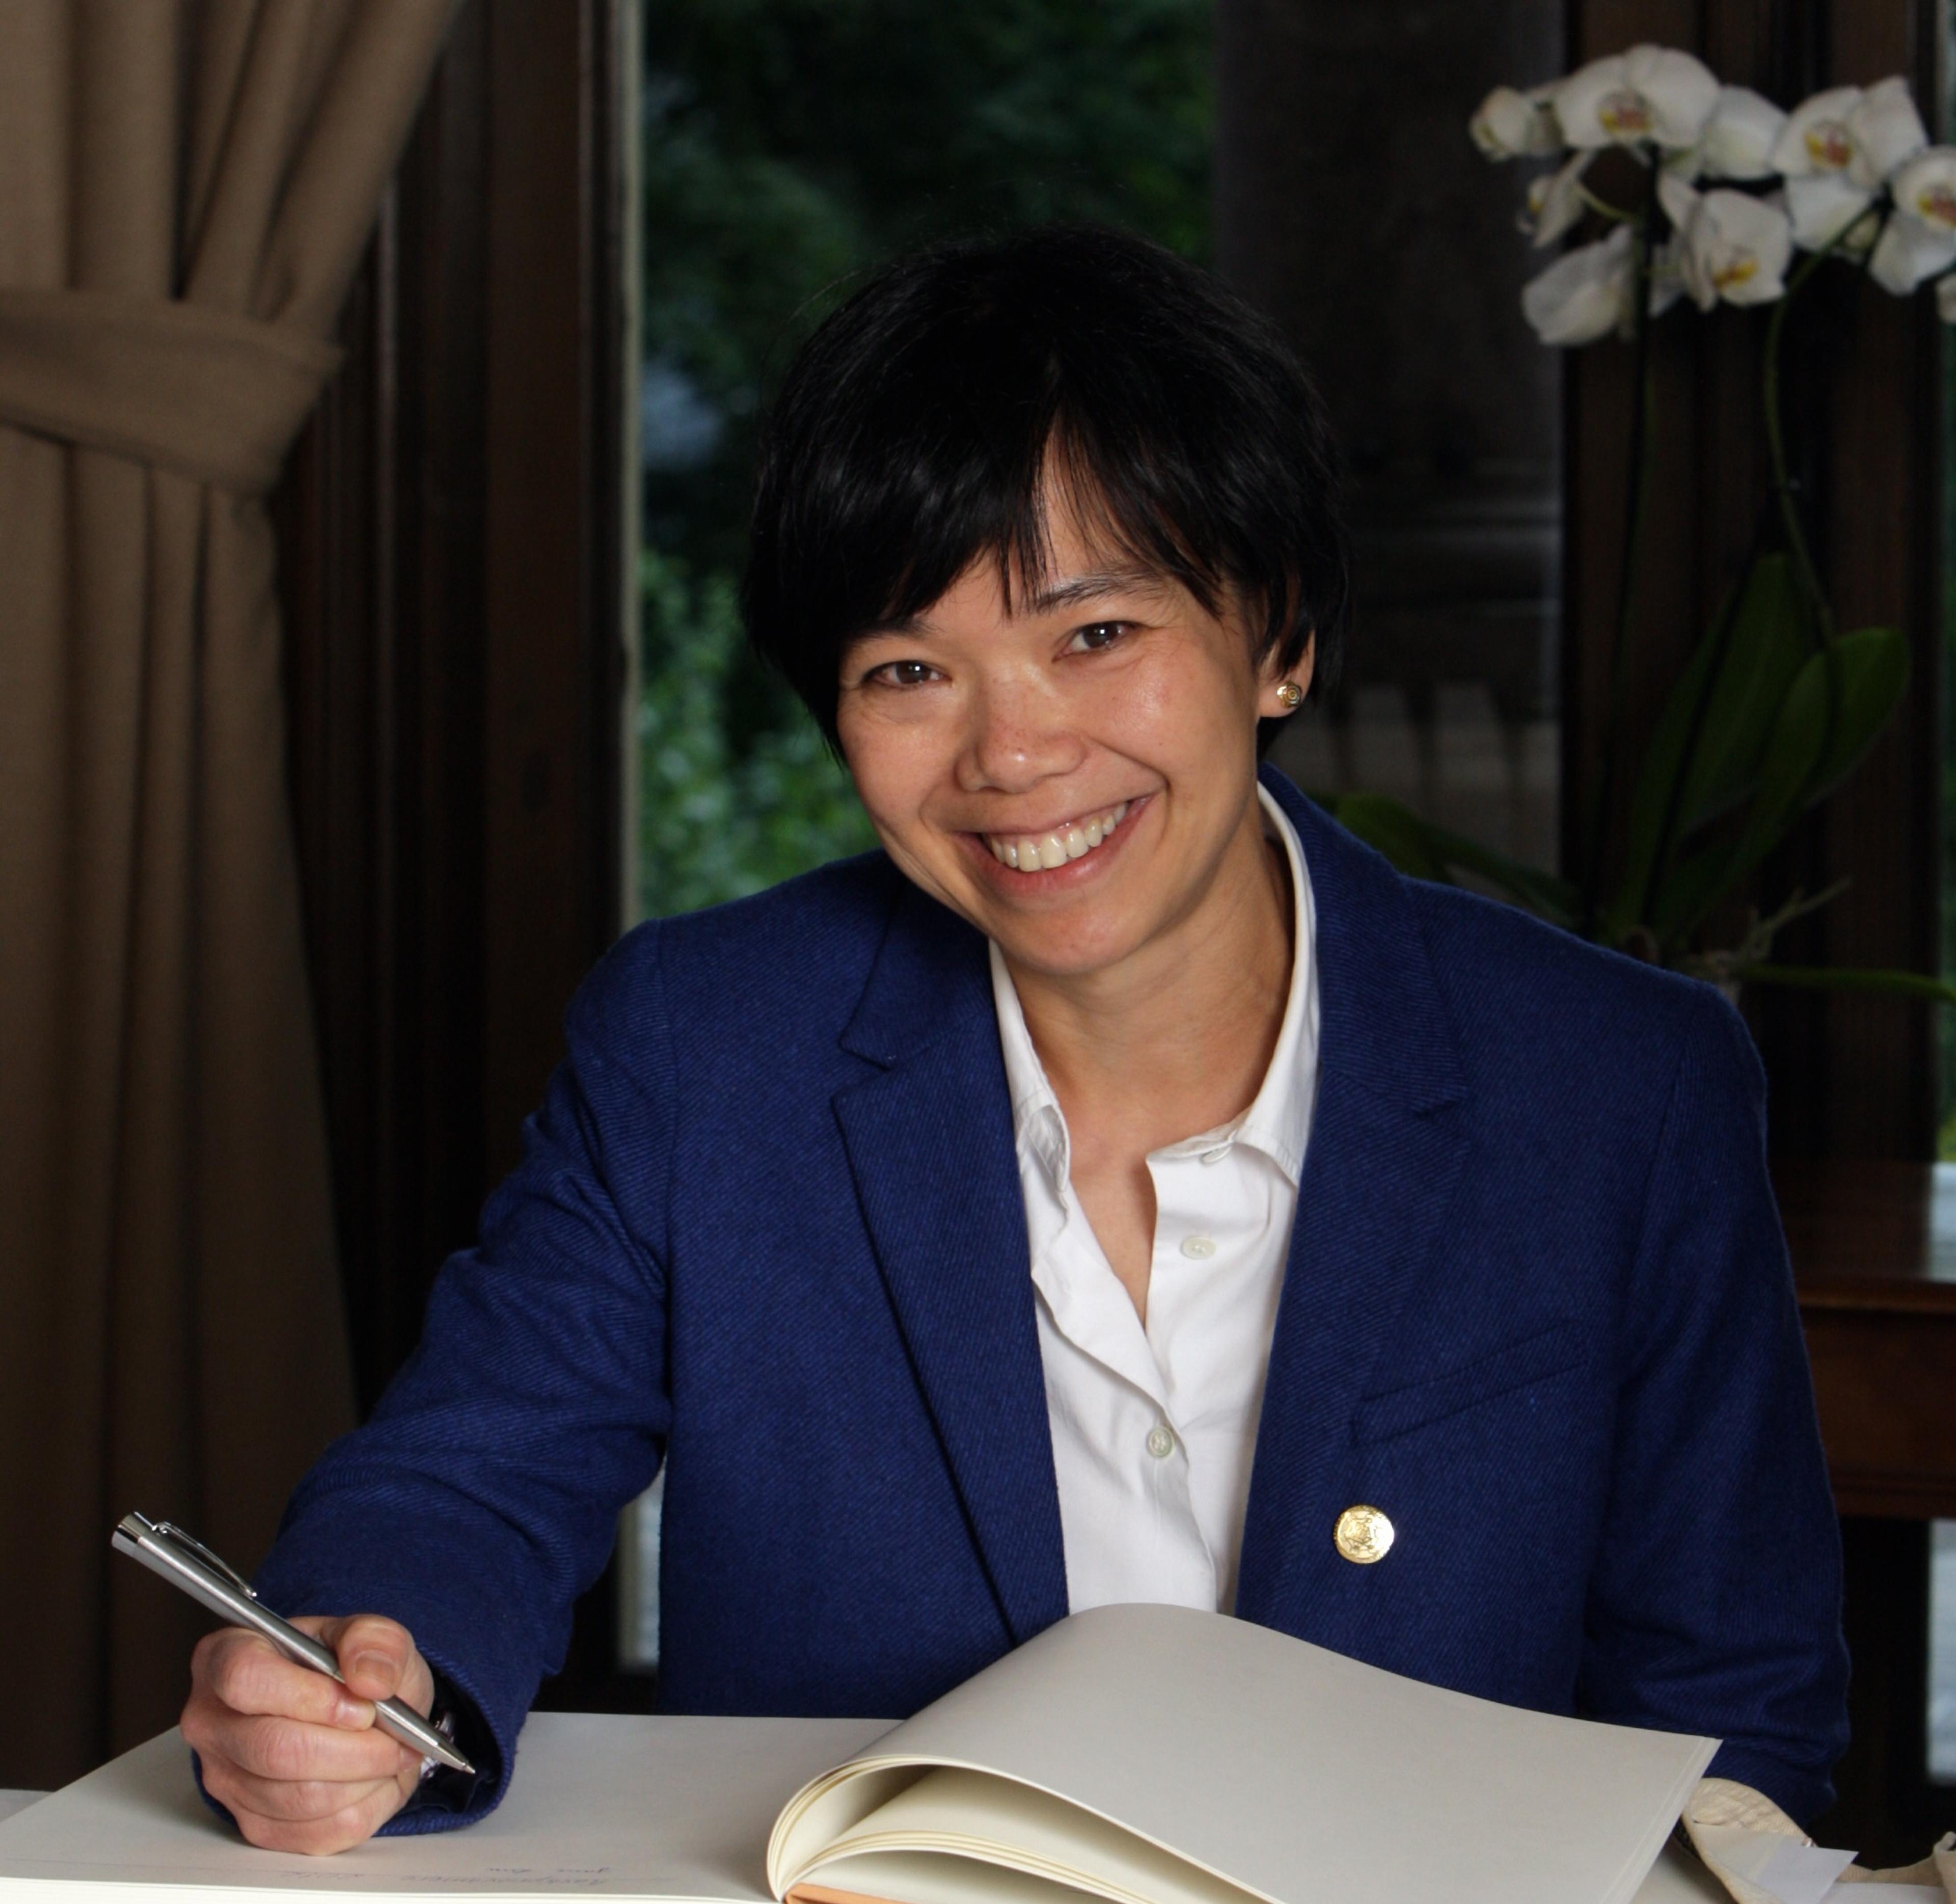 Jane X. Luu signing the guest book at the Norwegian Academy of Science and Letters during the Kavli Prize week in Oslo